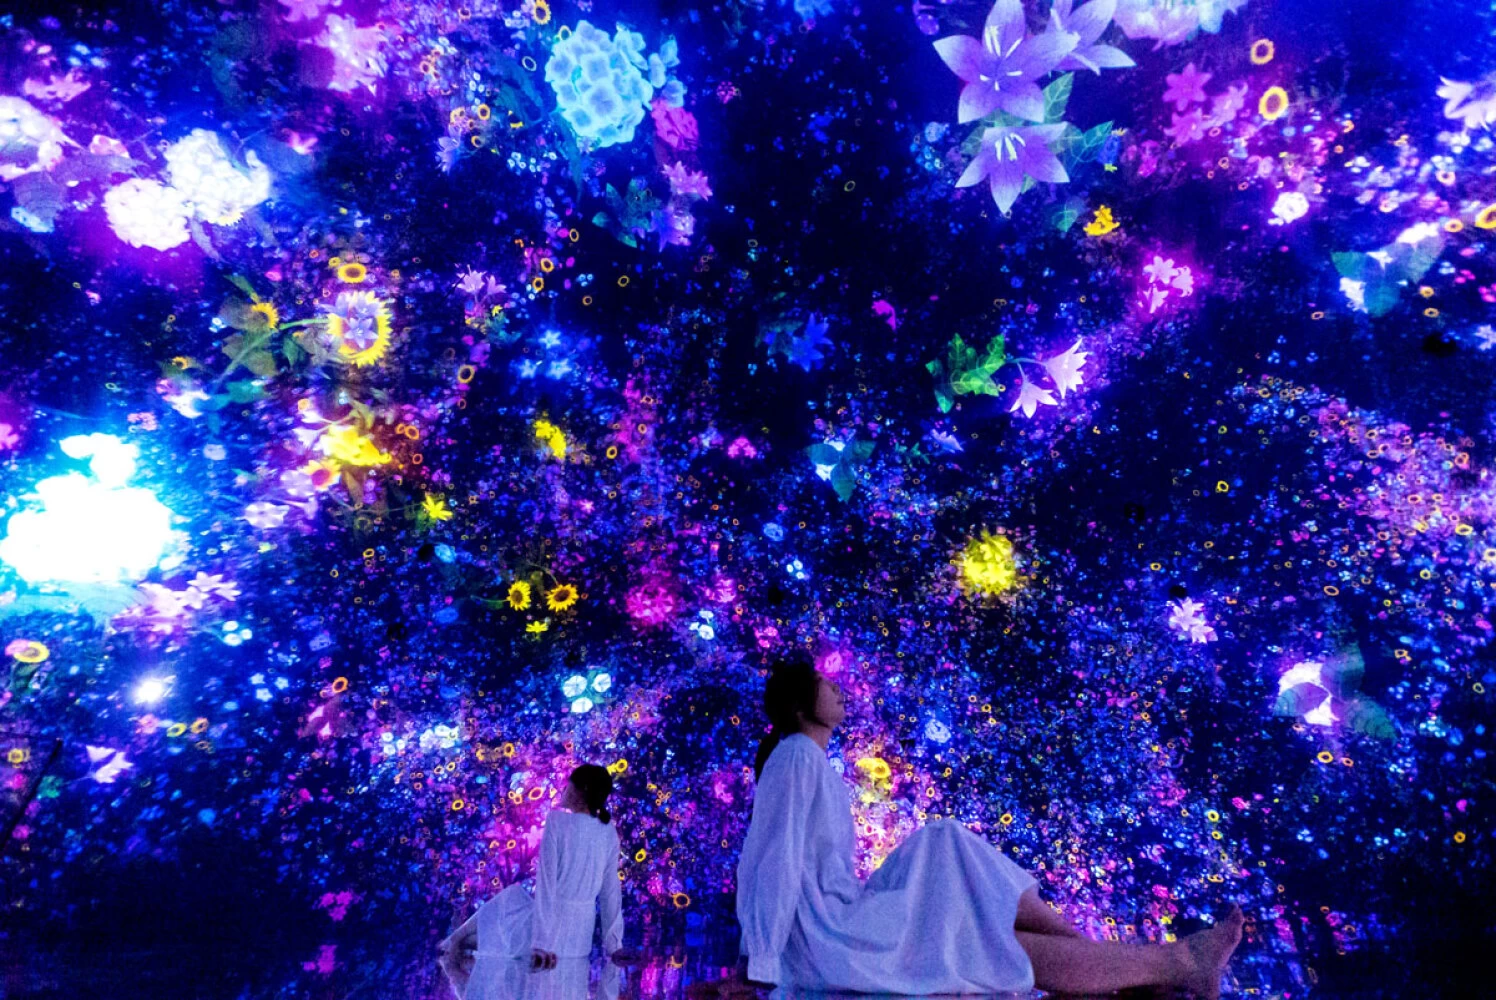 Floating-in-the-Falling-Universe-of-Flowers